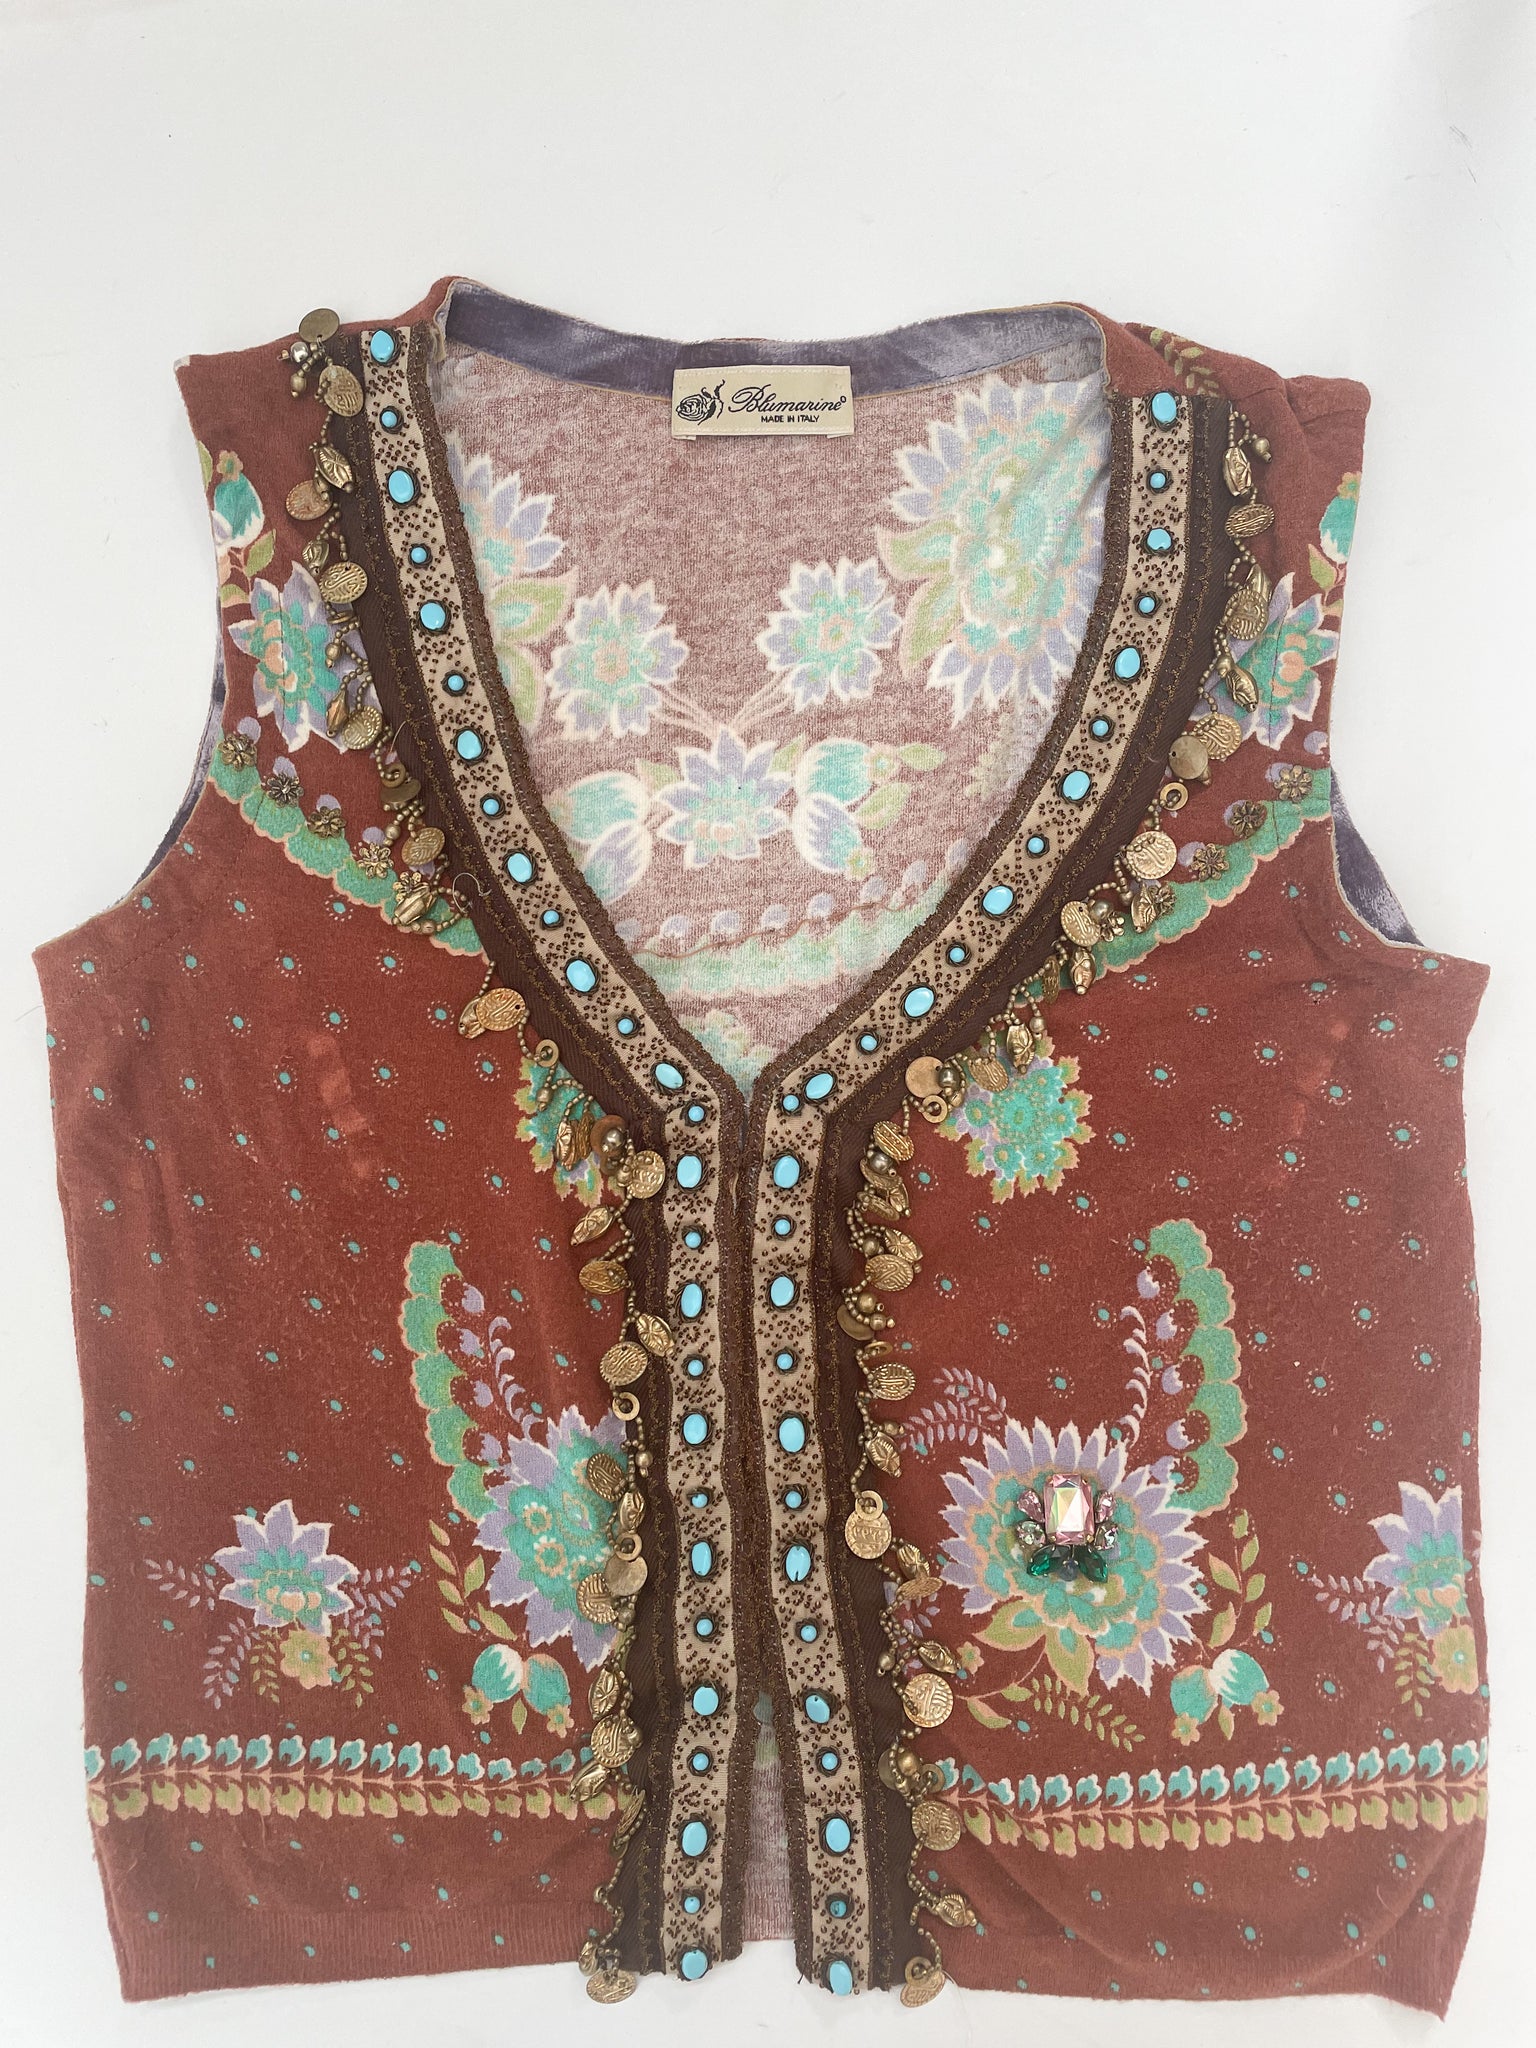 Blumarine S/S 2005 Runway boho print knit top with incredible coin and turquoise embellishments